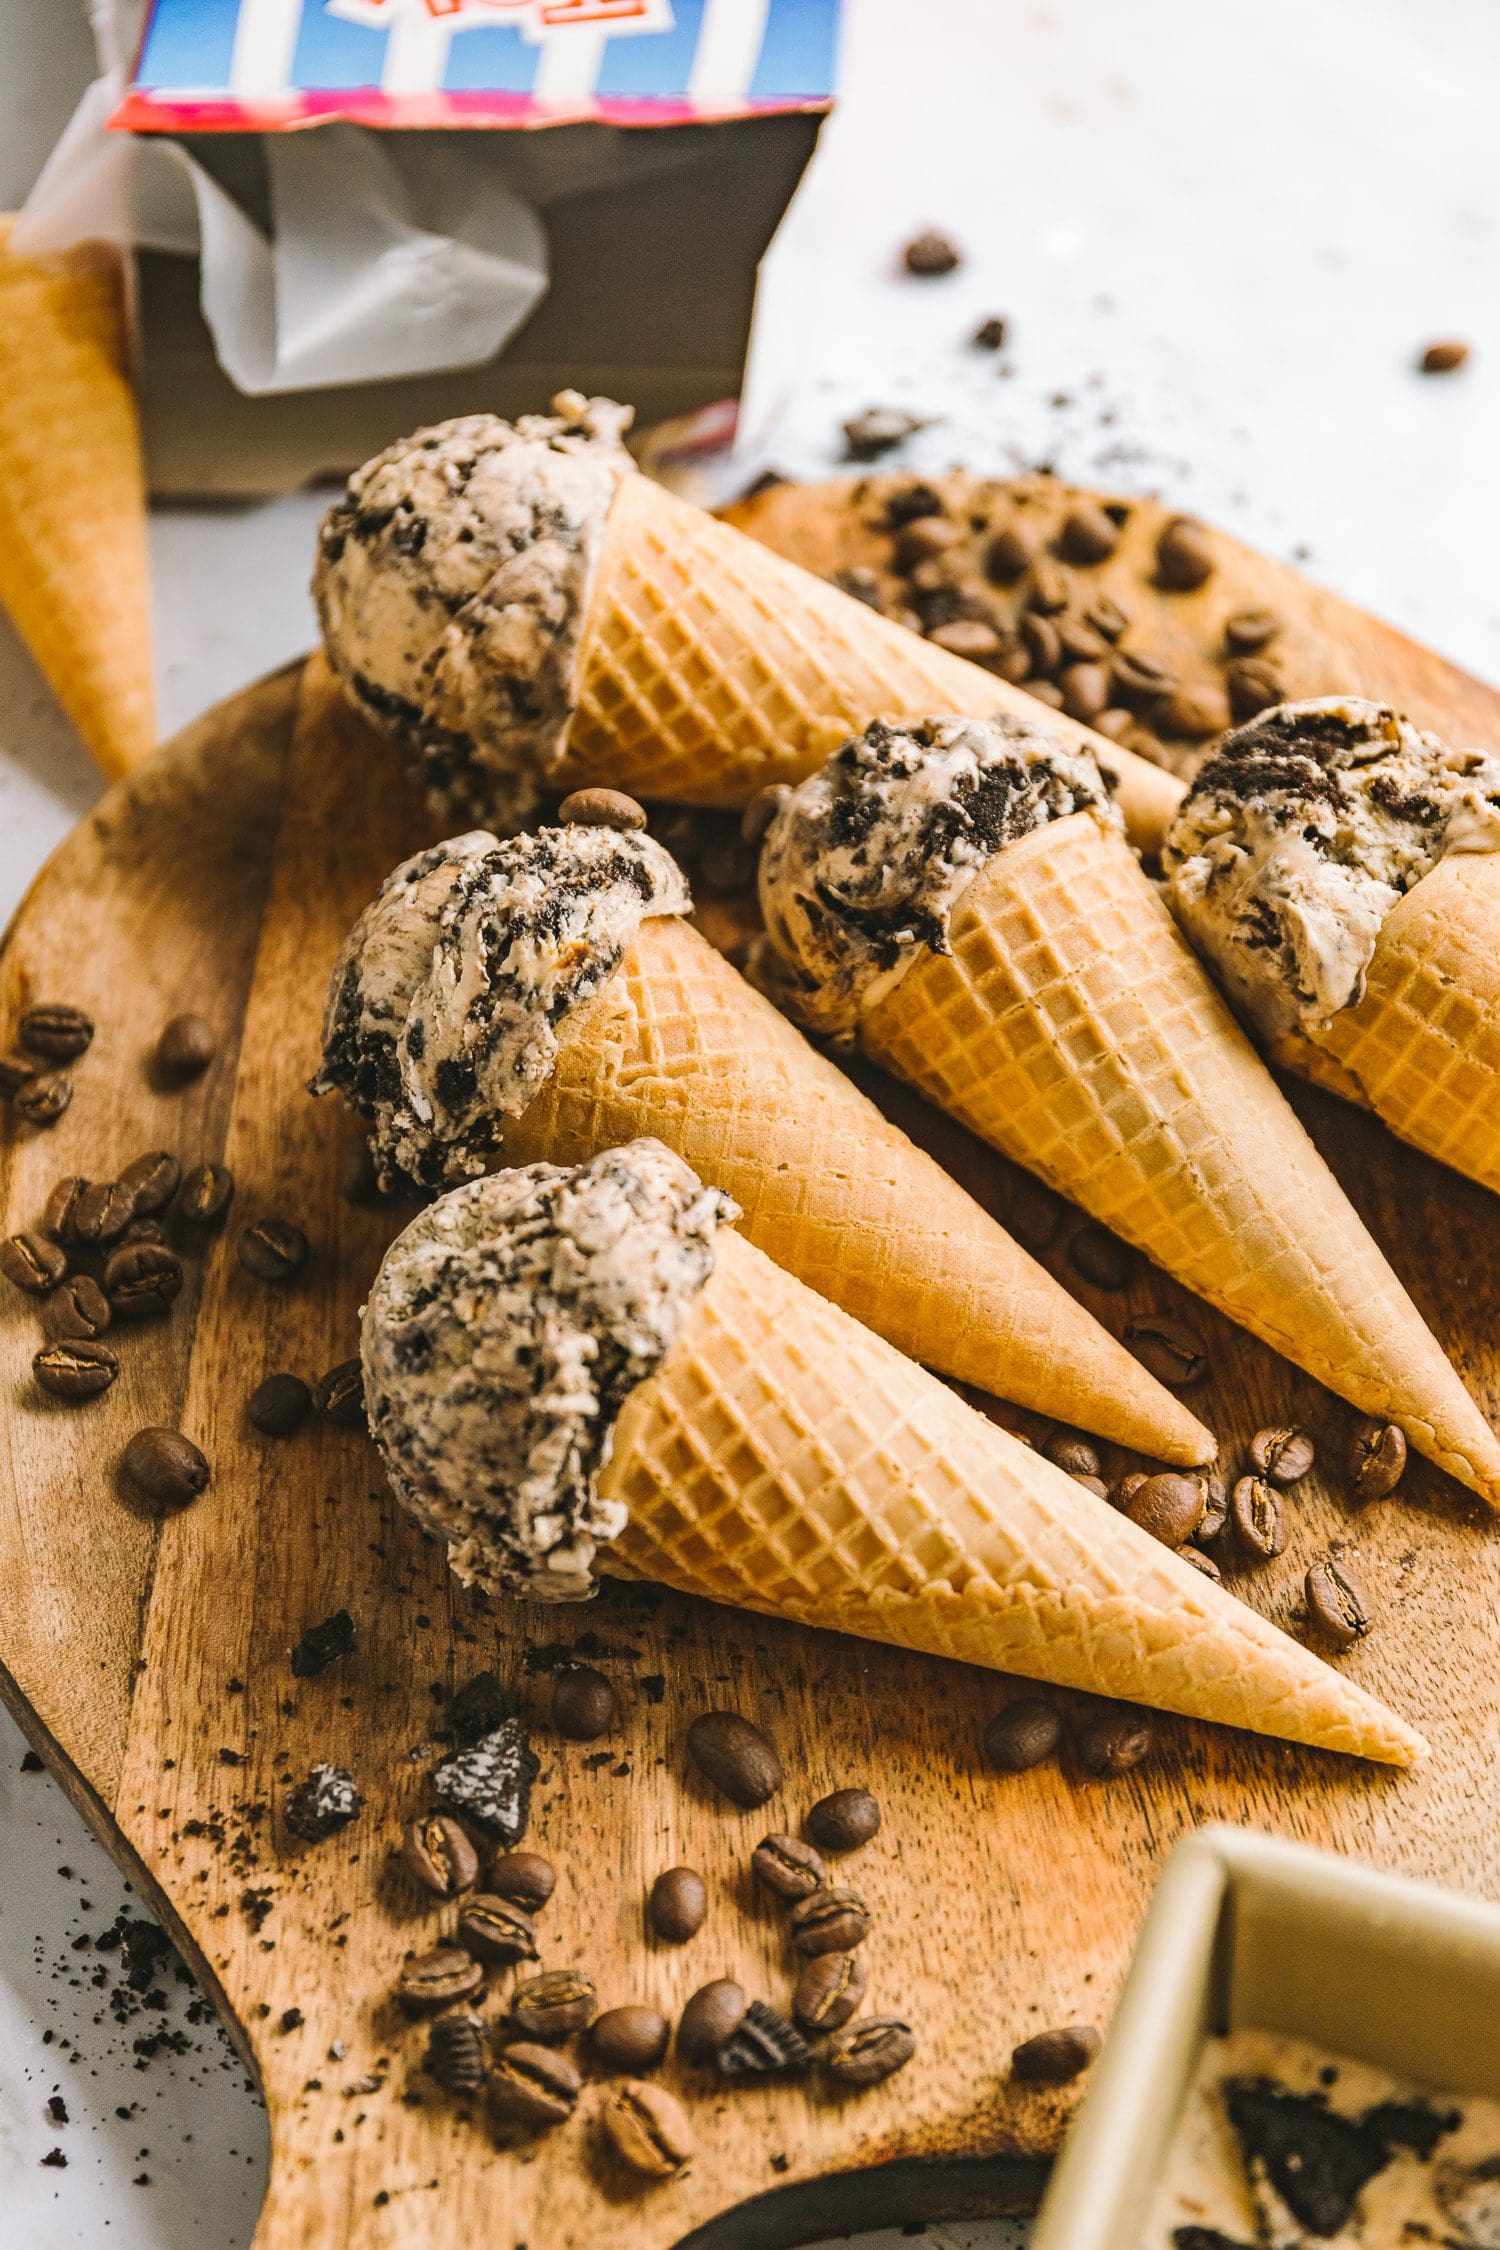 The 7 best ice cream makers for sundaes at home in 2023